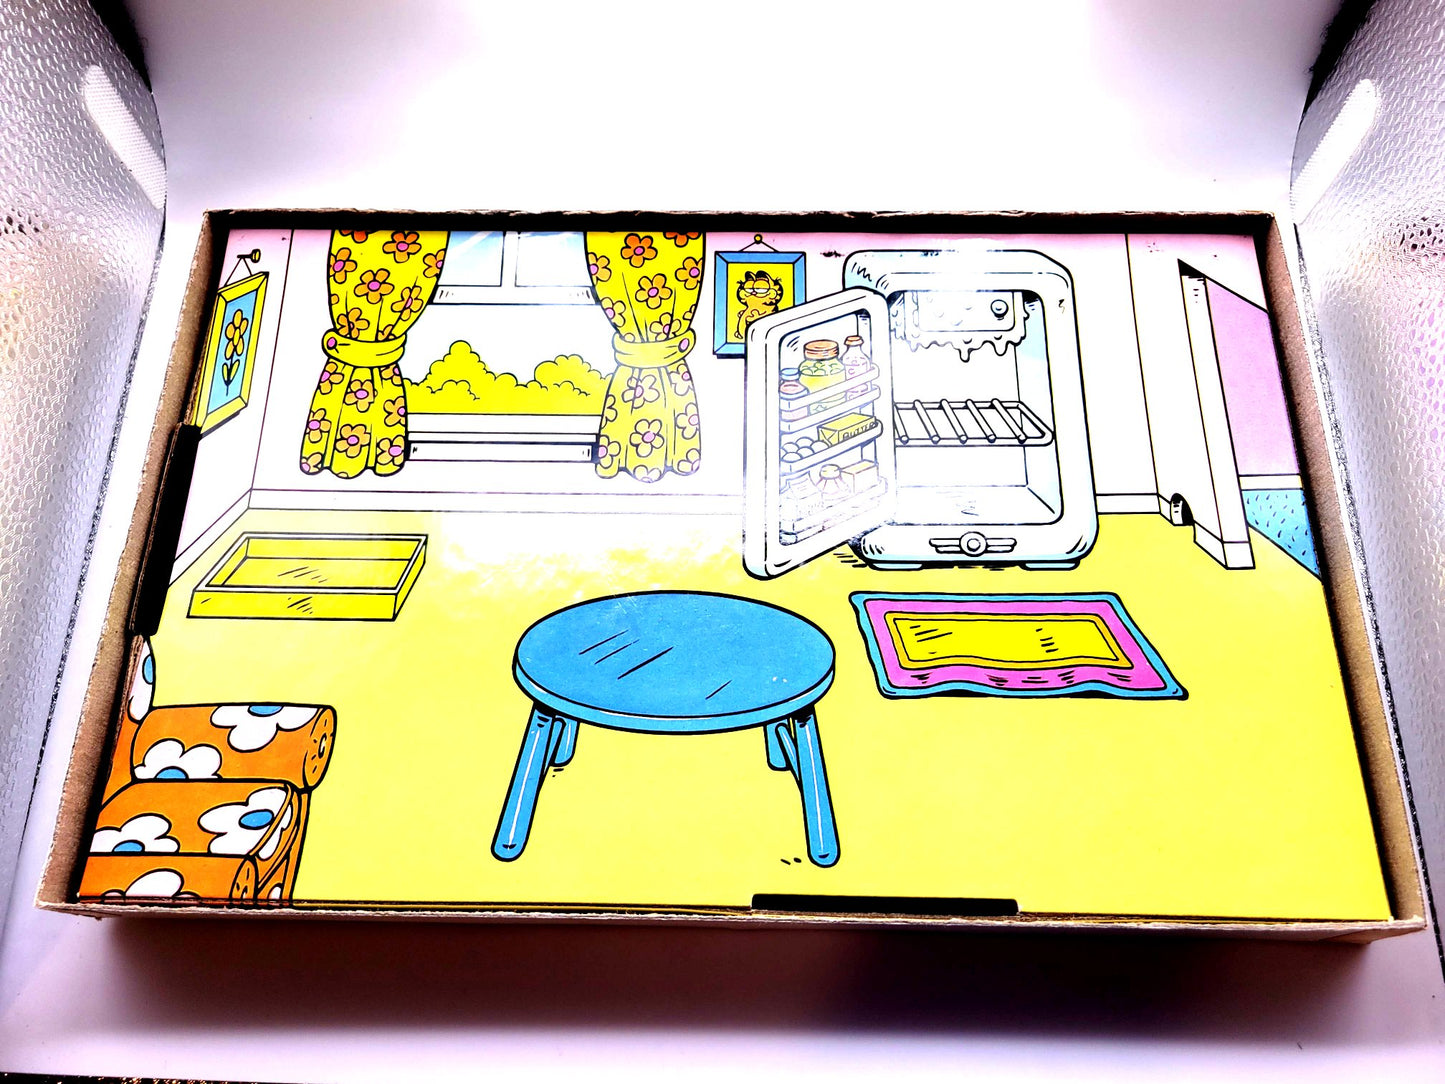 Garfield (1978) Colorforms Play Set (Incomplete)